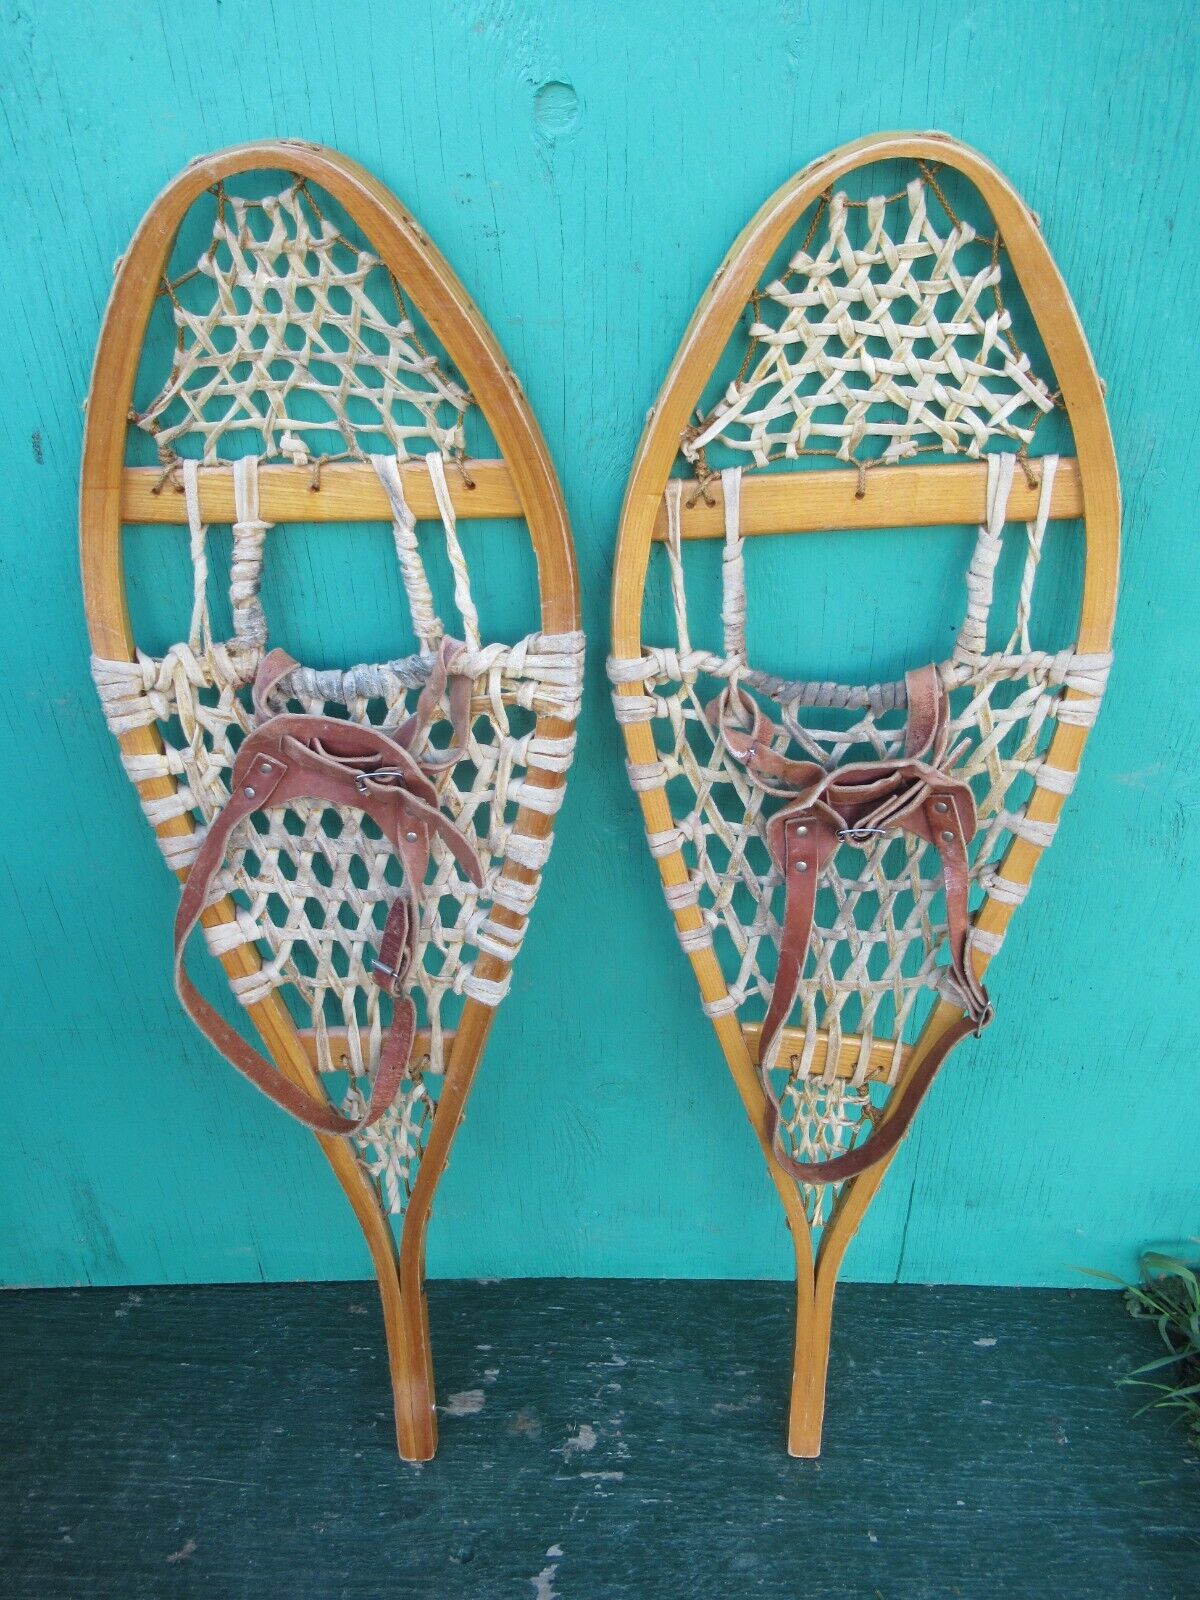 Great Snowshoes 37" Long X 11" Wide  With Leather Bindings Decorative